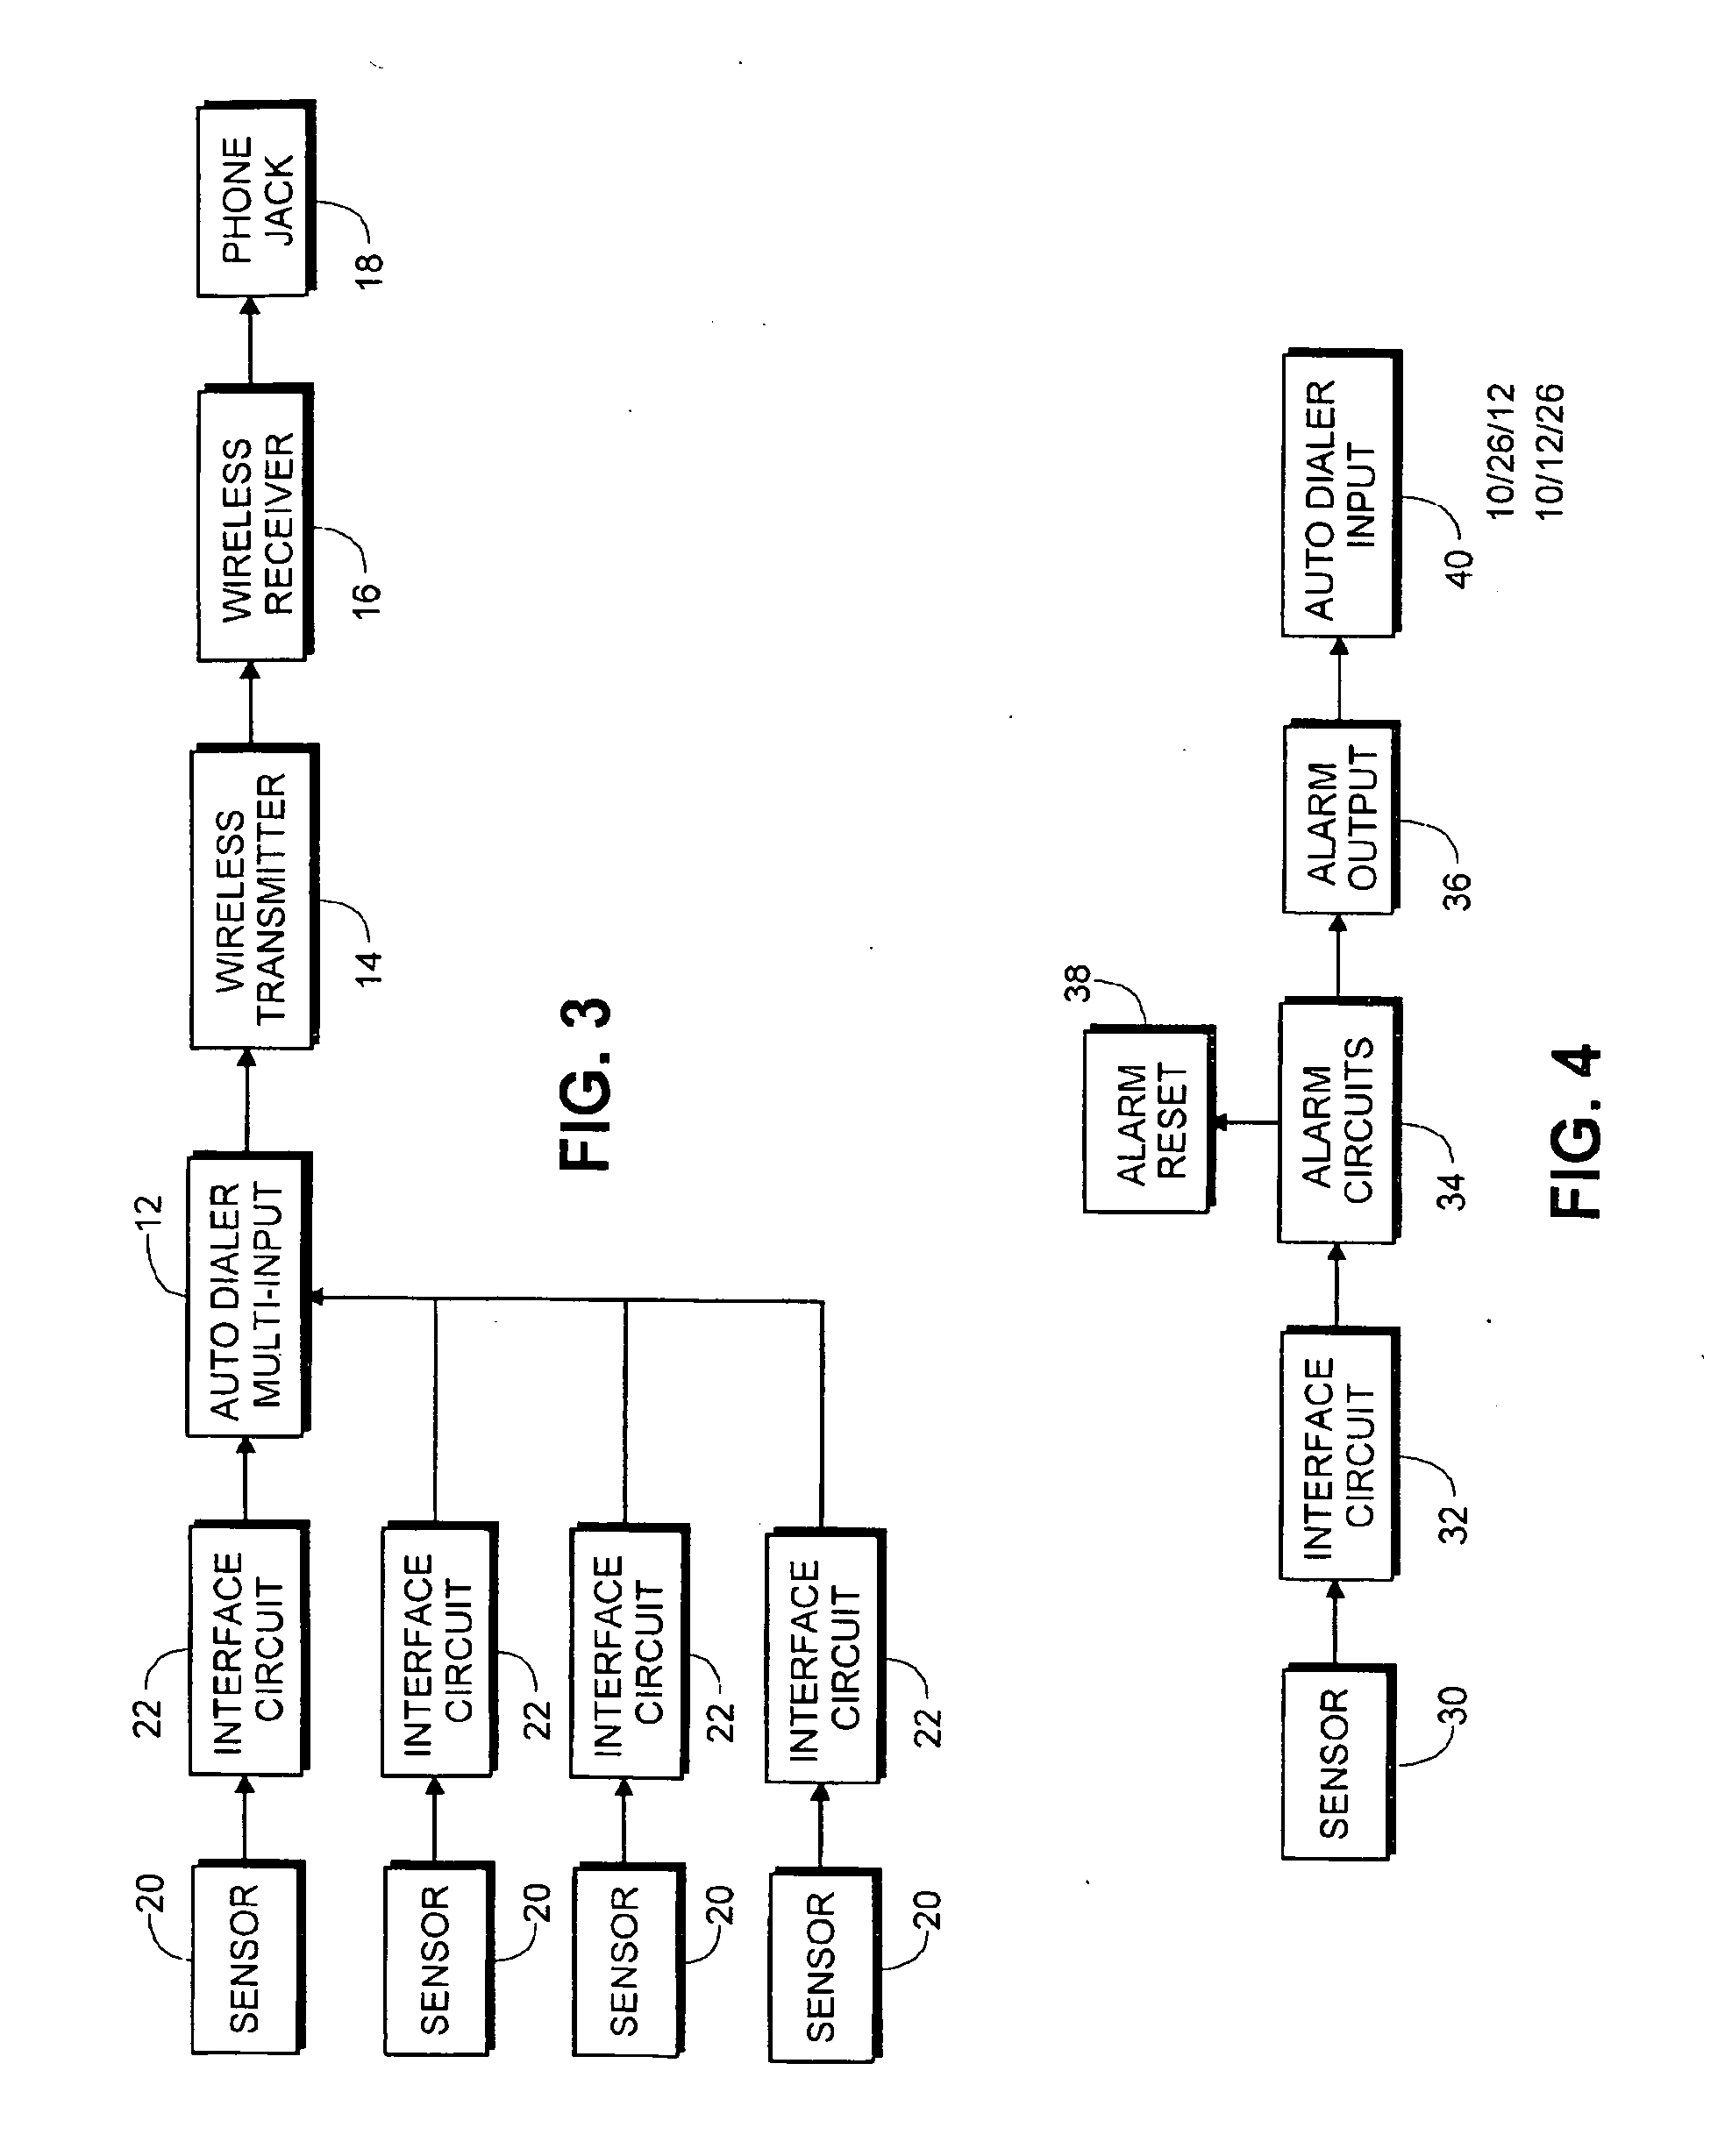 System for requesting service of a machine